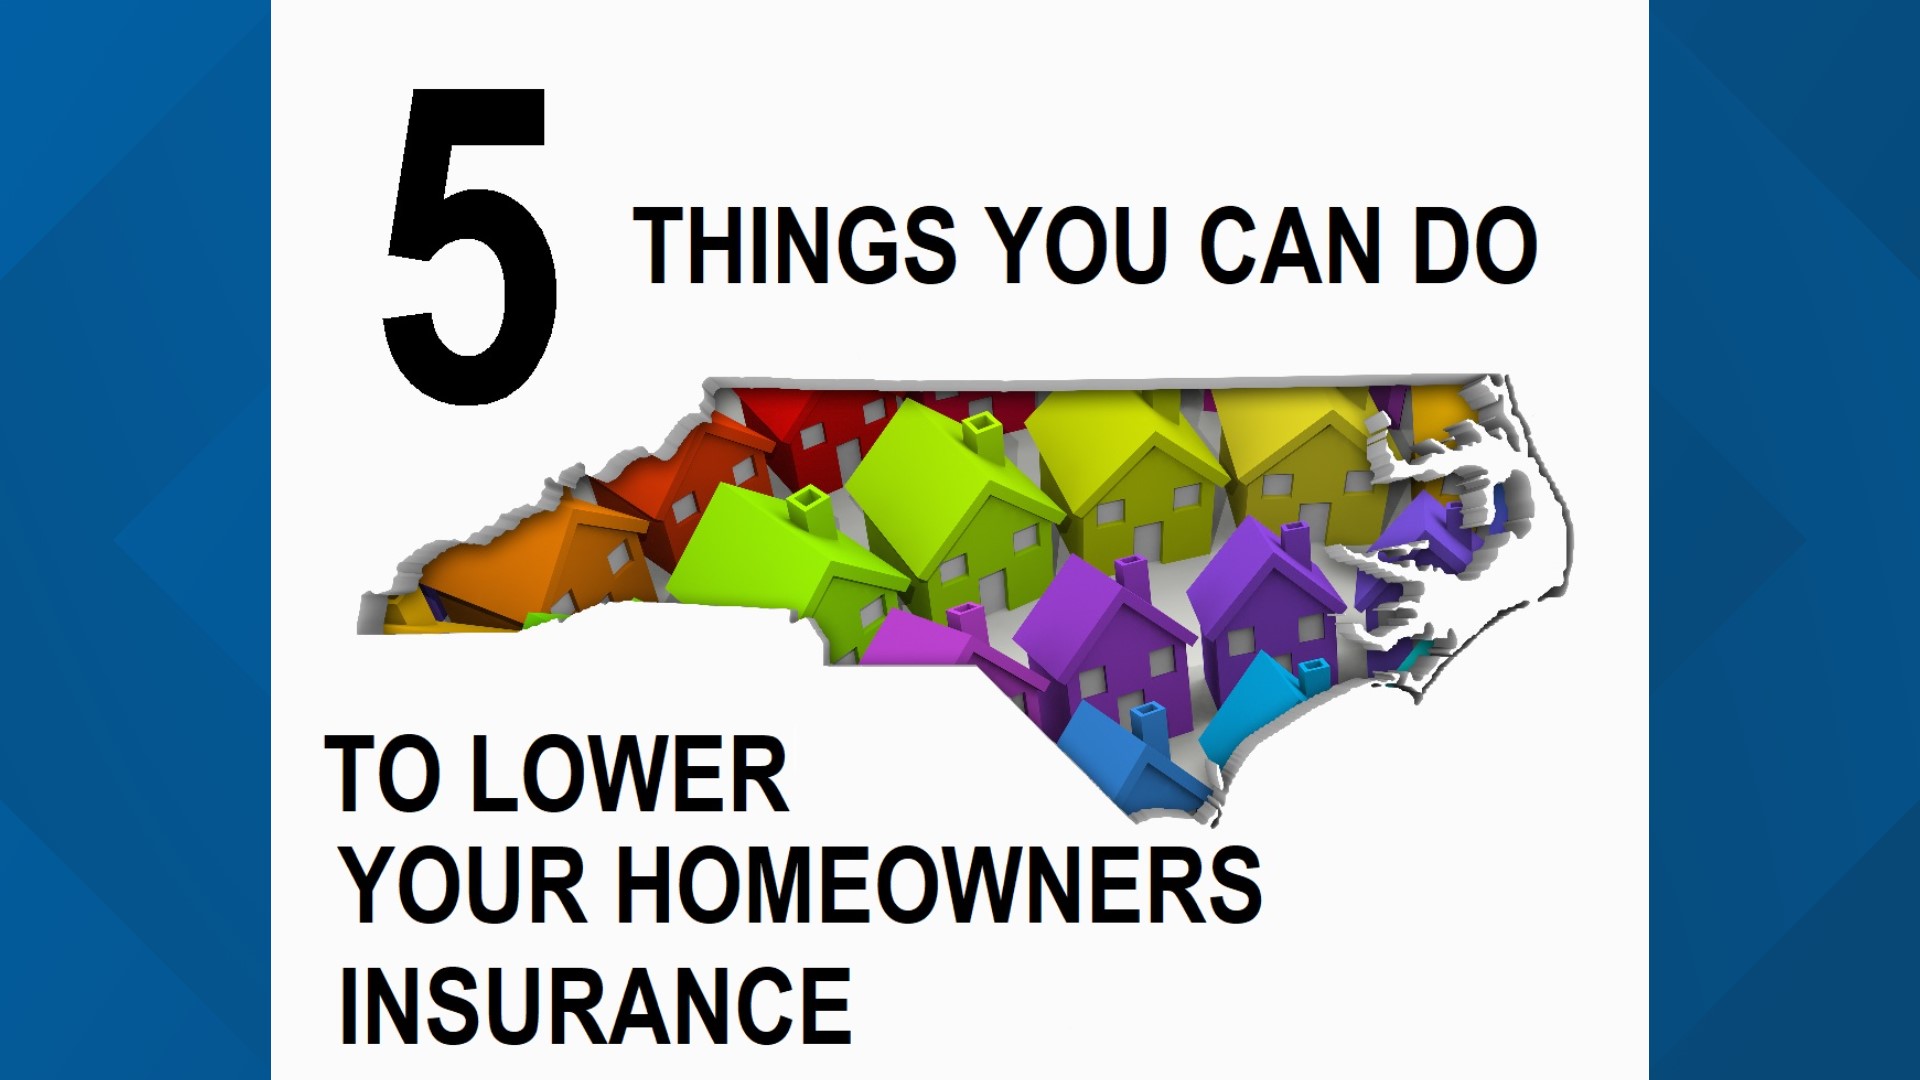 Five things you can do to lower your homeowners' insurance.